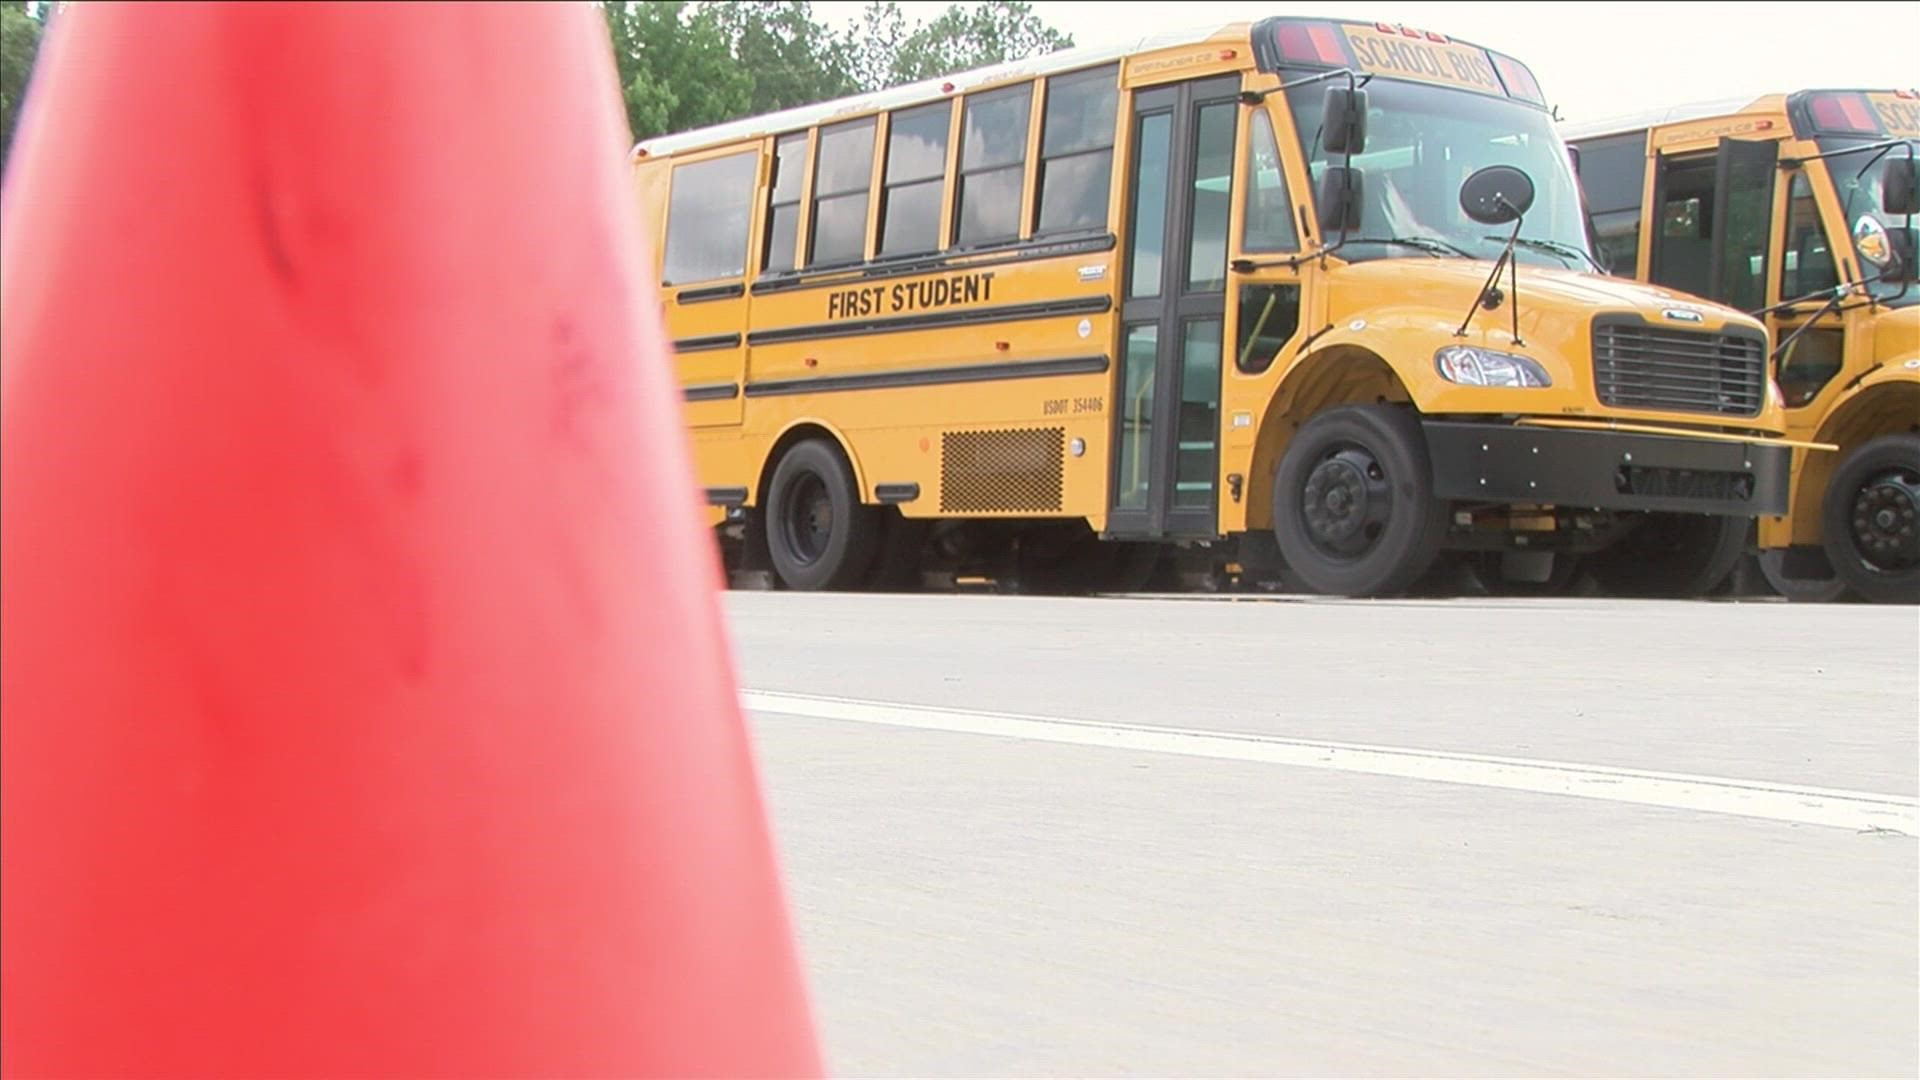 Those with 'First Student' said 330 drivers are on board to cover the nearly 300 routes districtwide, following months of recruiting and training.